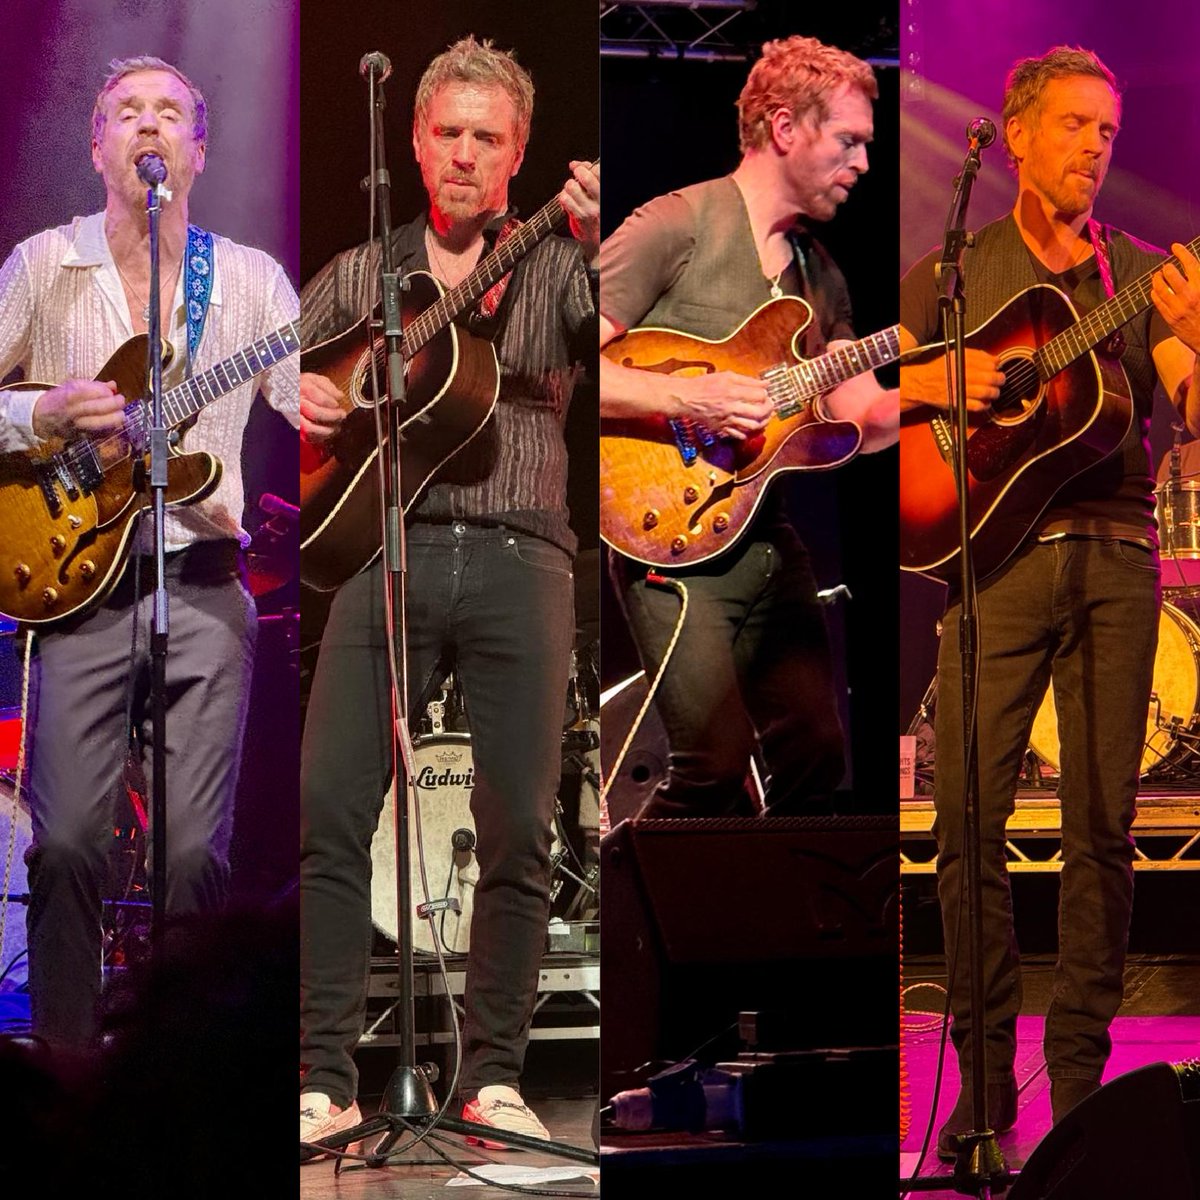 Four gigs 🎸🎶🕺🏼🪩 One interview 🎙️🤗❤️ Infinite fun 🎉👑😃🍺👏🏻💕 Here’s everything I have for you from Damian Lewis’ UK Tour Part II: fanfunwithdamianlewis.com/?tag=uk-tour-p… #DamianLewis #DamianLewisMusic #DamianLewisUKTour #MissionCreepTour #MissionCreep